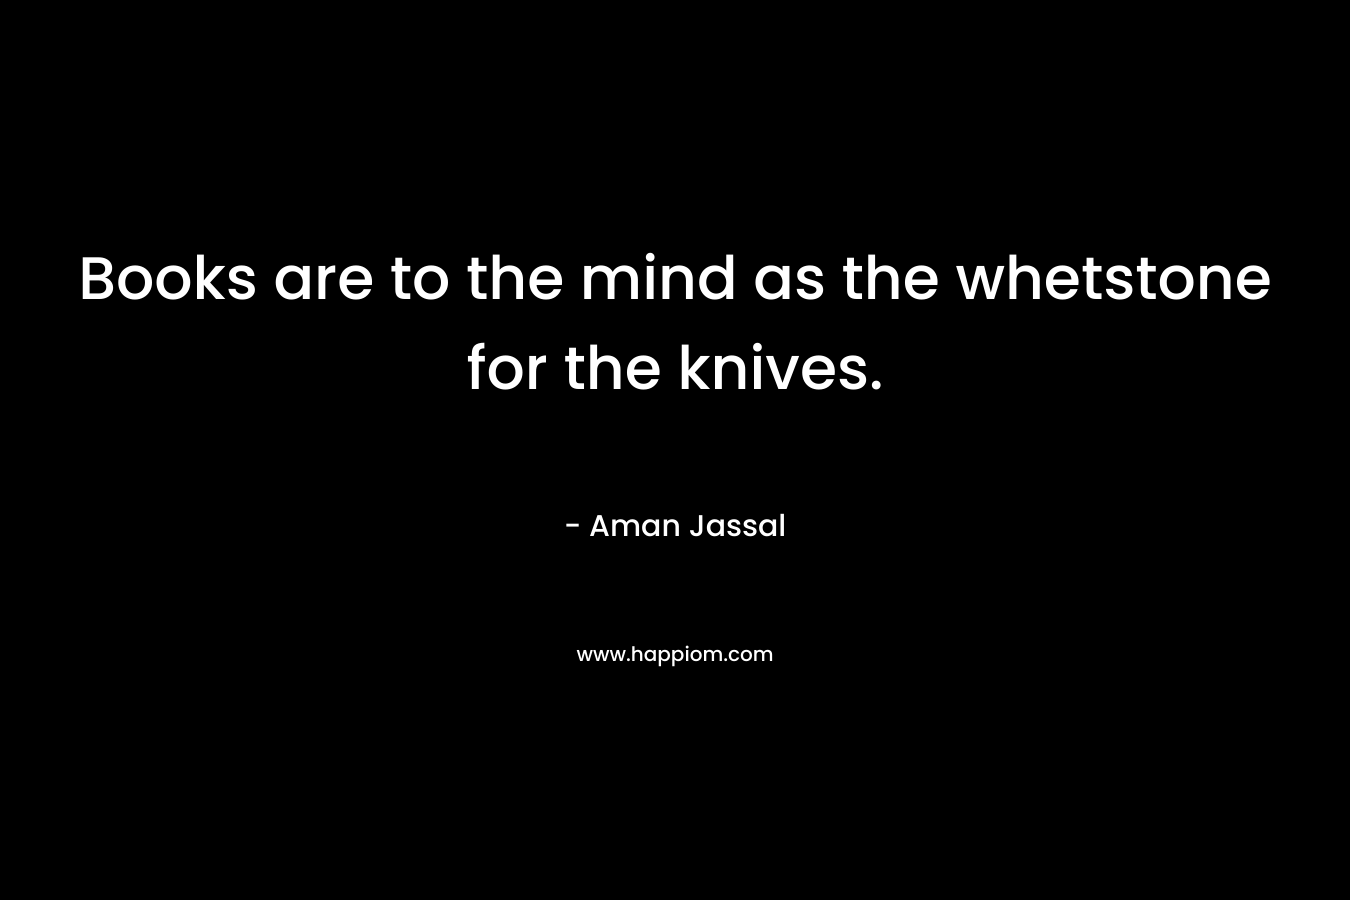 Books are to the mind as the whetstone for the knives. – Aman Jassal